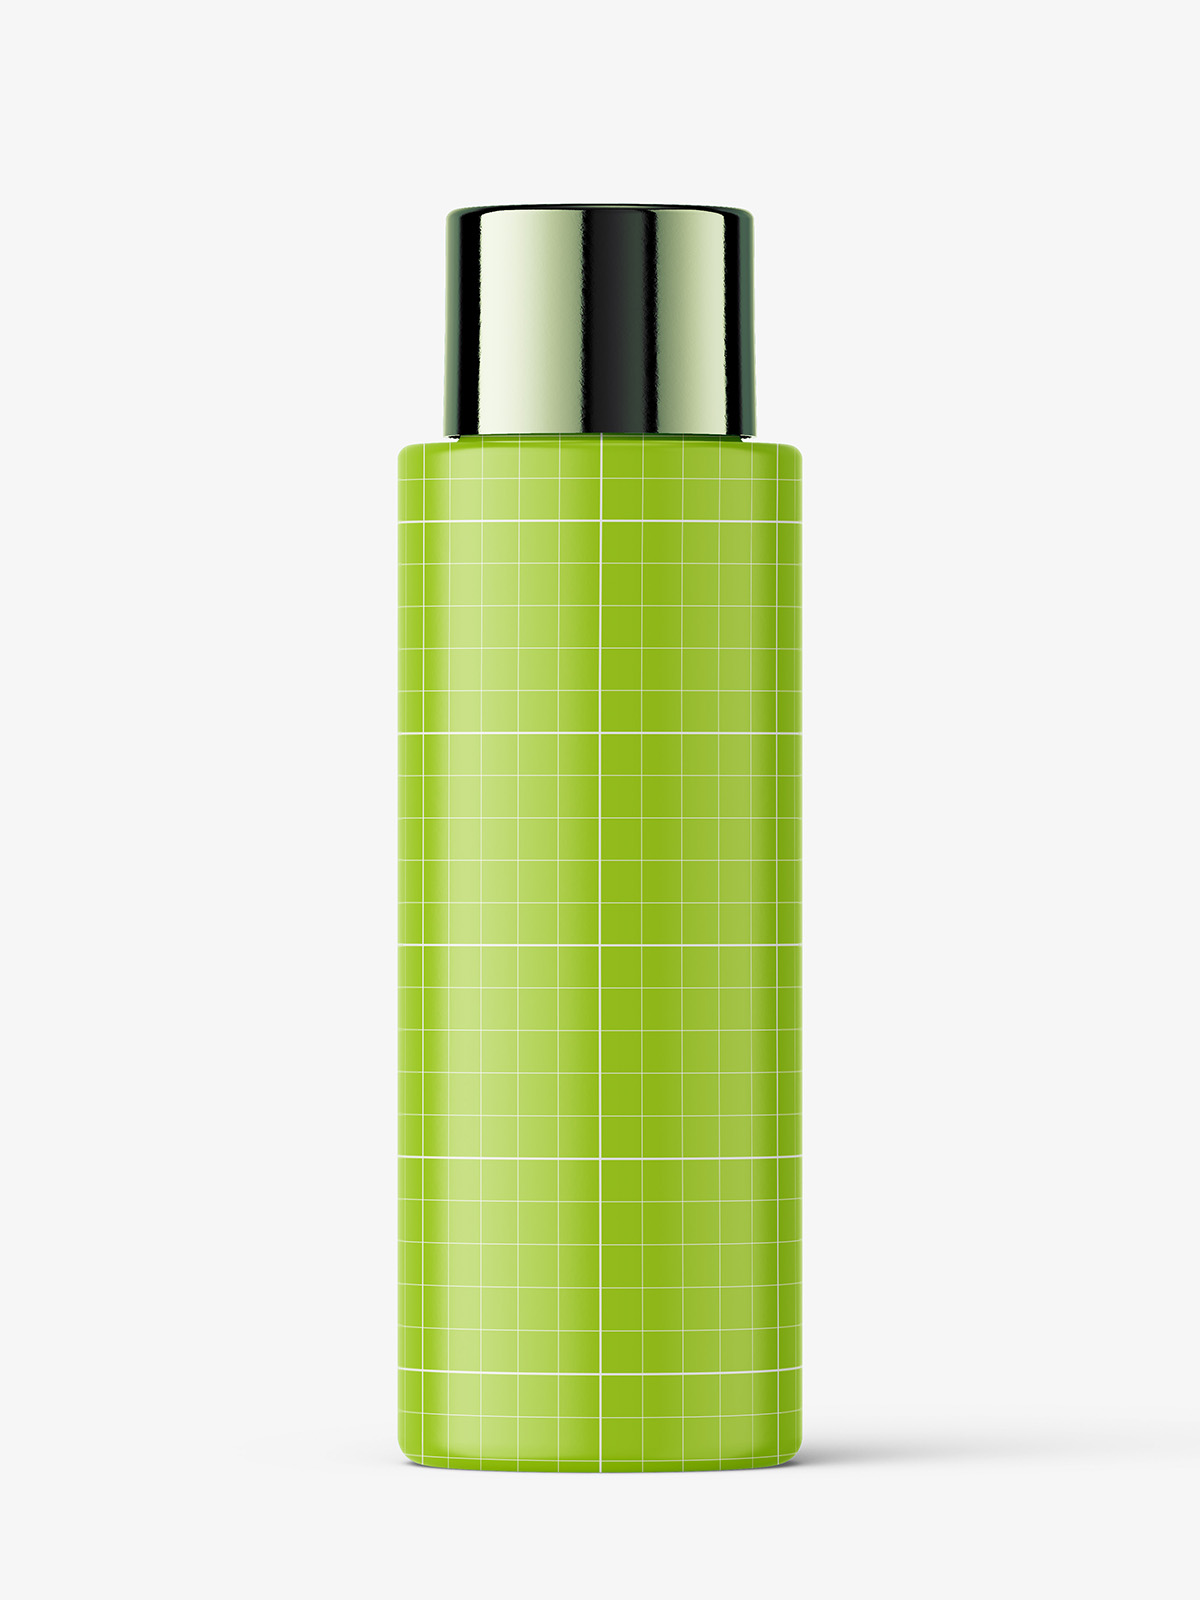 Simple cosmetic round bottle mockup / clear - Smarty Mockups